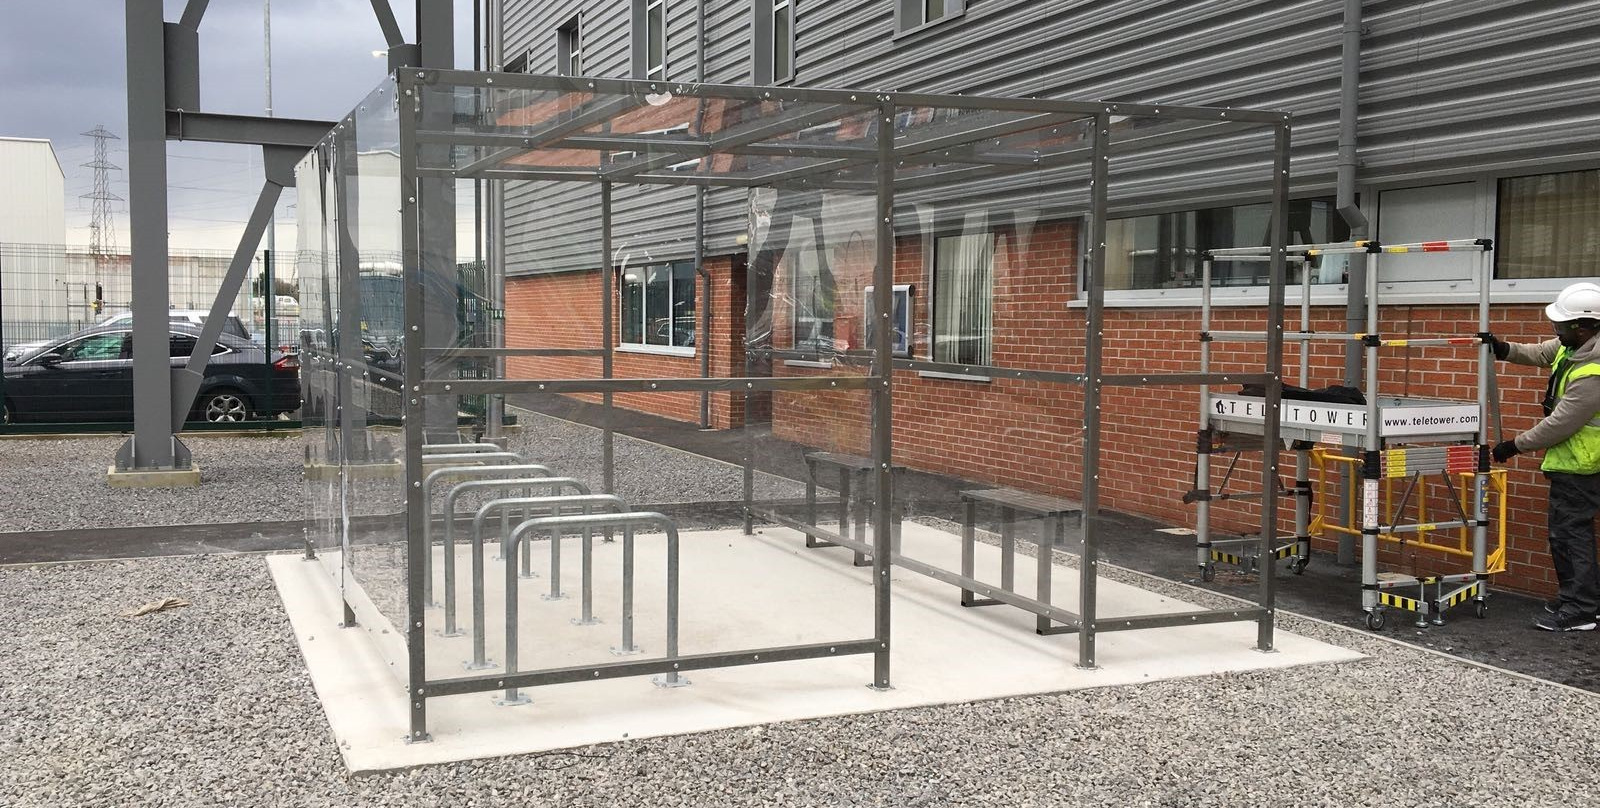 Image of a Shelter Store Carrington Smoking Shelter with Sheffield Bike Stands